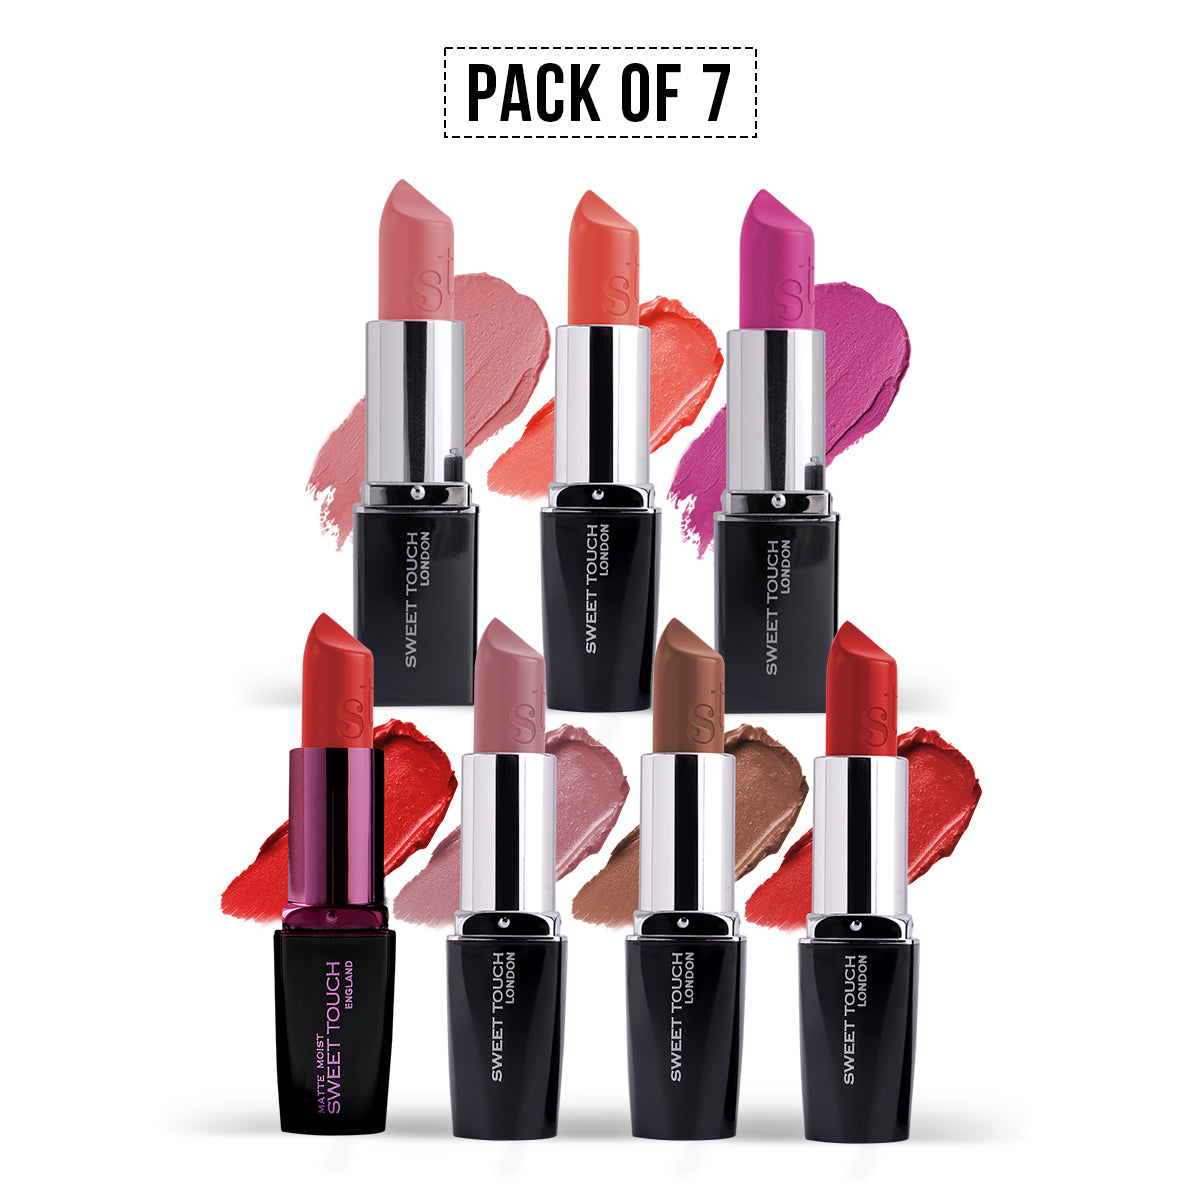 Rouge Eclipse Lipstick Set - Pack of 7